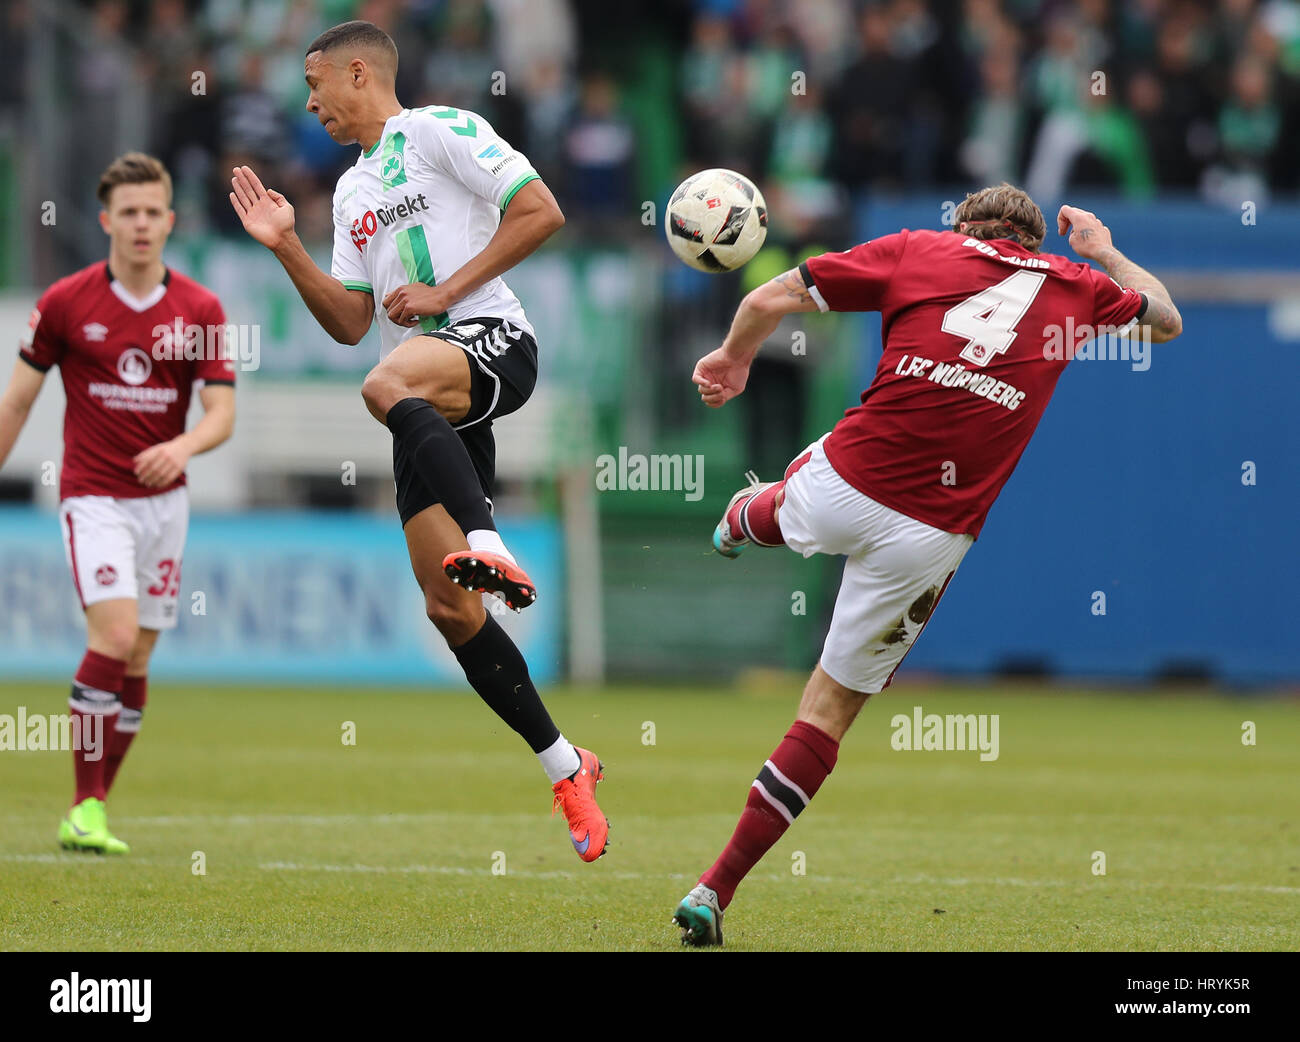 Fuerth, Germany. 5th Mar, 2017. Fuerth's Mathis Bolly (c) and Nuremberg's Dave Bulthuis (r) in action during the 2nd Bundesliga soccer match between SpVgg Greuther Fuerth and 1. FC Nuremberg at the Stadion am Laubenweg in Fuerth, Germany, 5 March 2017. (EMBARGO CONDITIONS - ATTENTION: Due to the accreditation guidlines, the DFL only permits the publication and utilisation of up to 15 pictures per match on the internet and in online media during the match.) Photo: Daniel Karmann/dpa/Alamy Live News Stock Photo